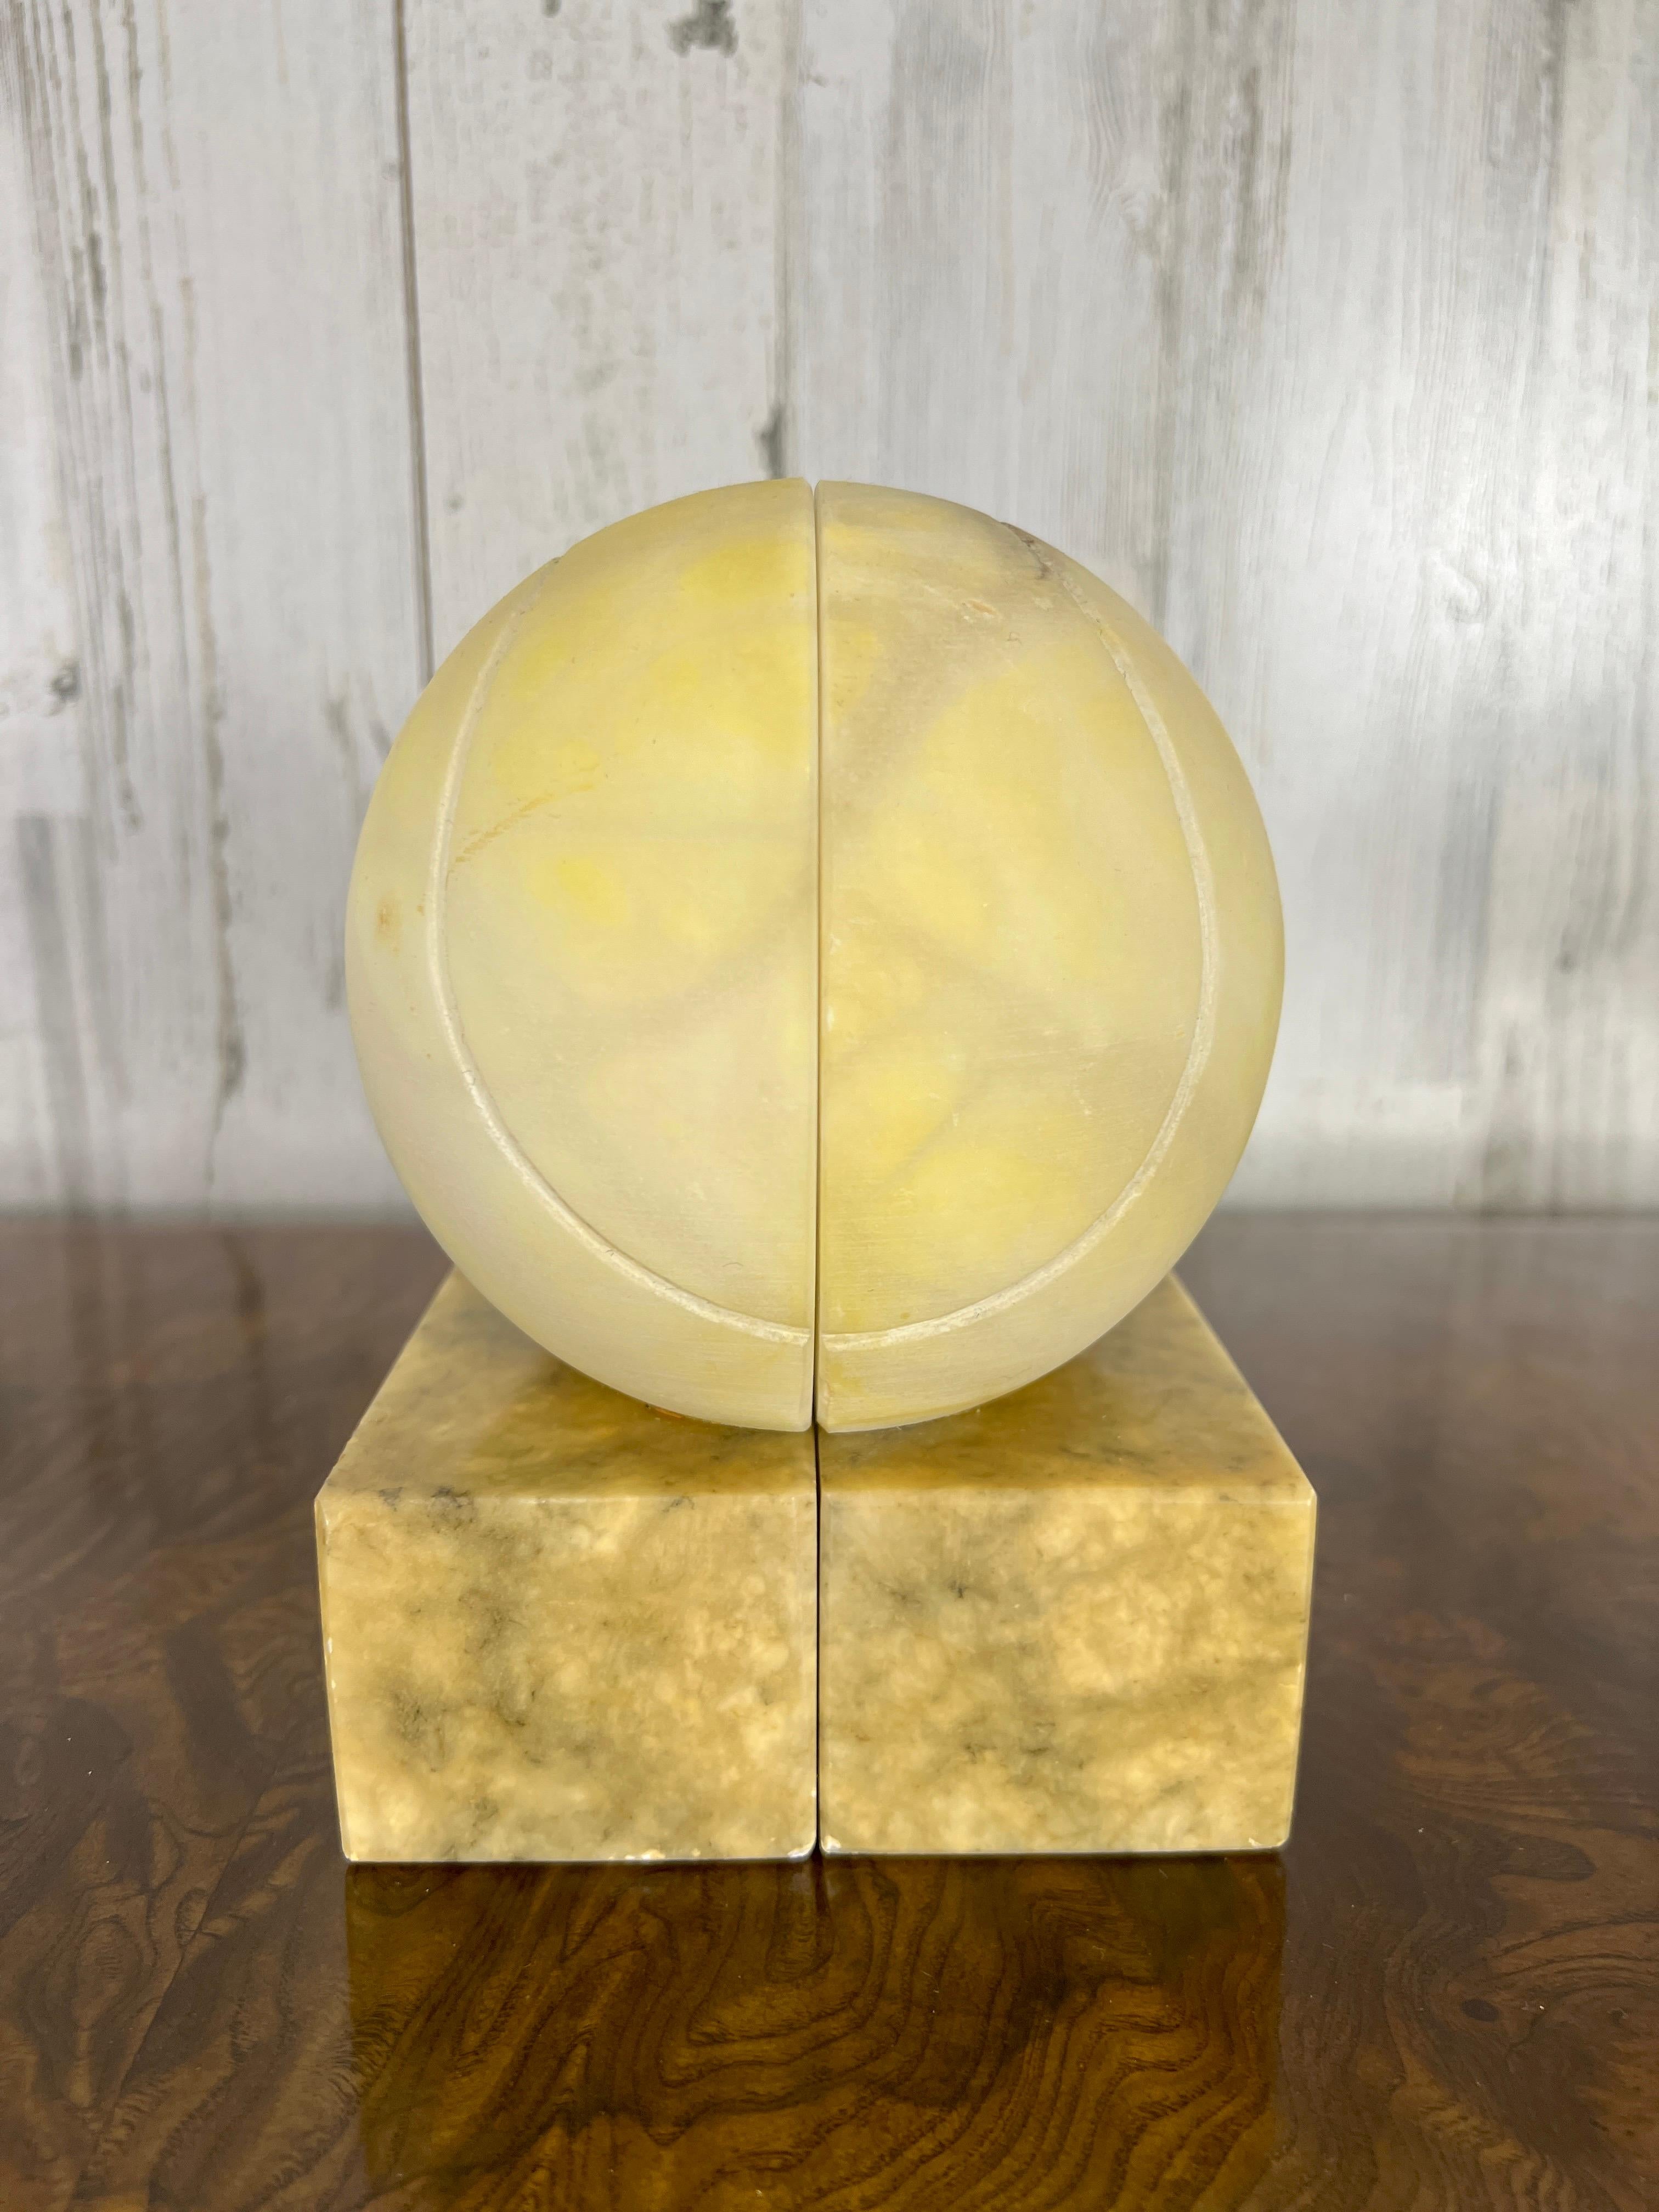 Solid alabaster carved into tennis ball design that can be used as a sculpture or book ends.